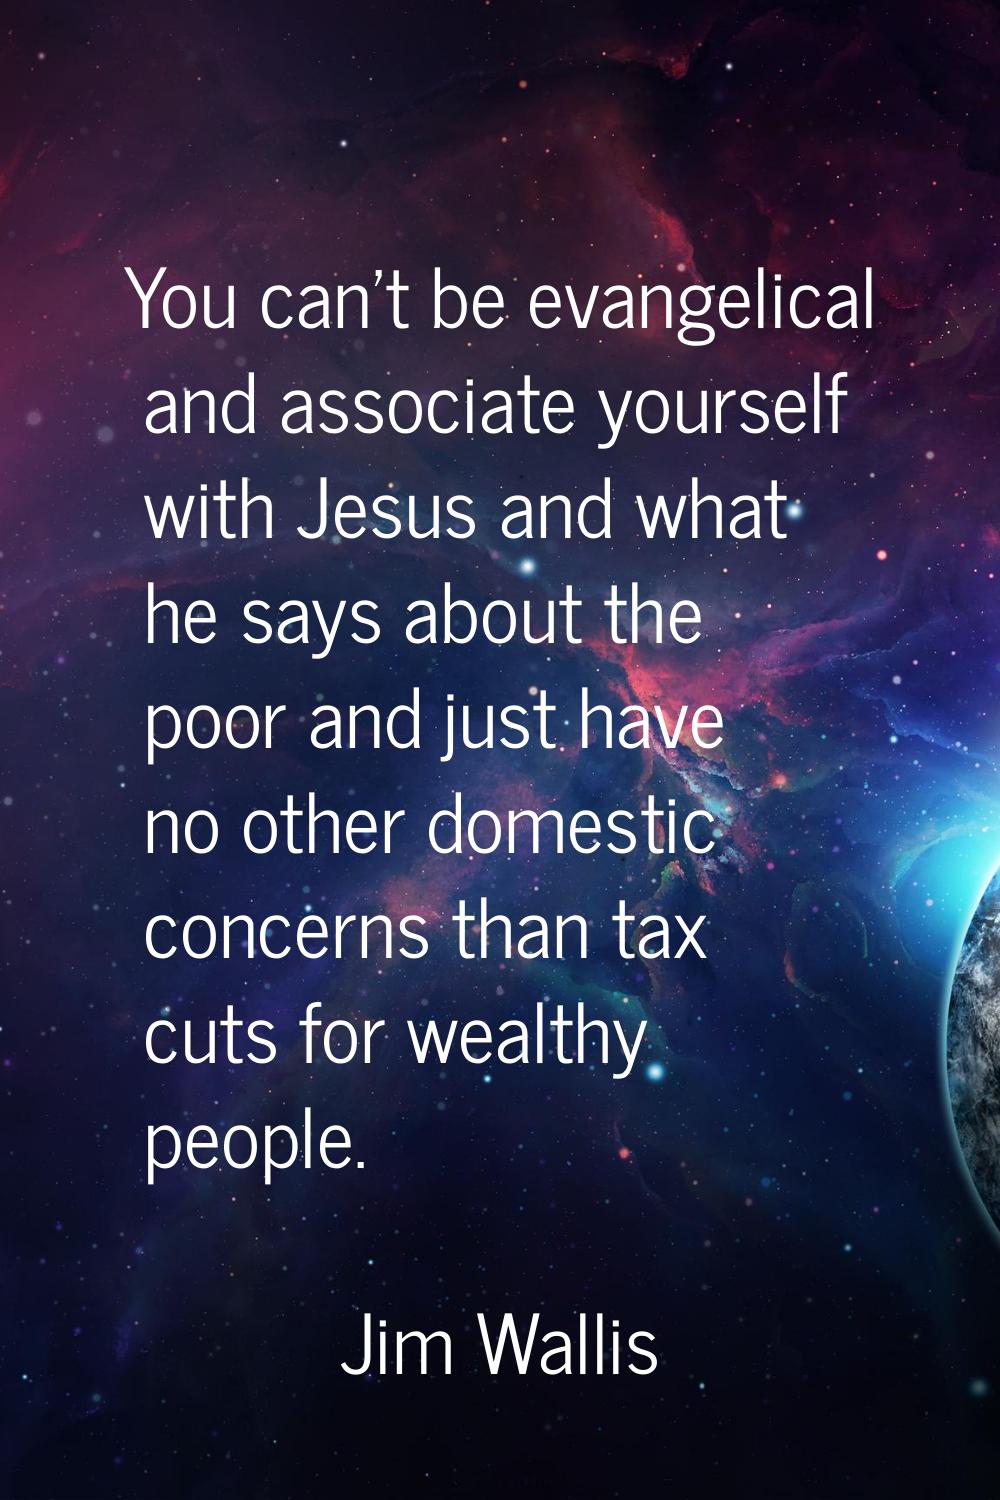 You can't be evangelical and associate yourself with Jesus and what he says about the poor and just